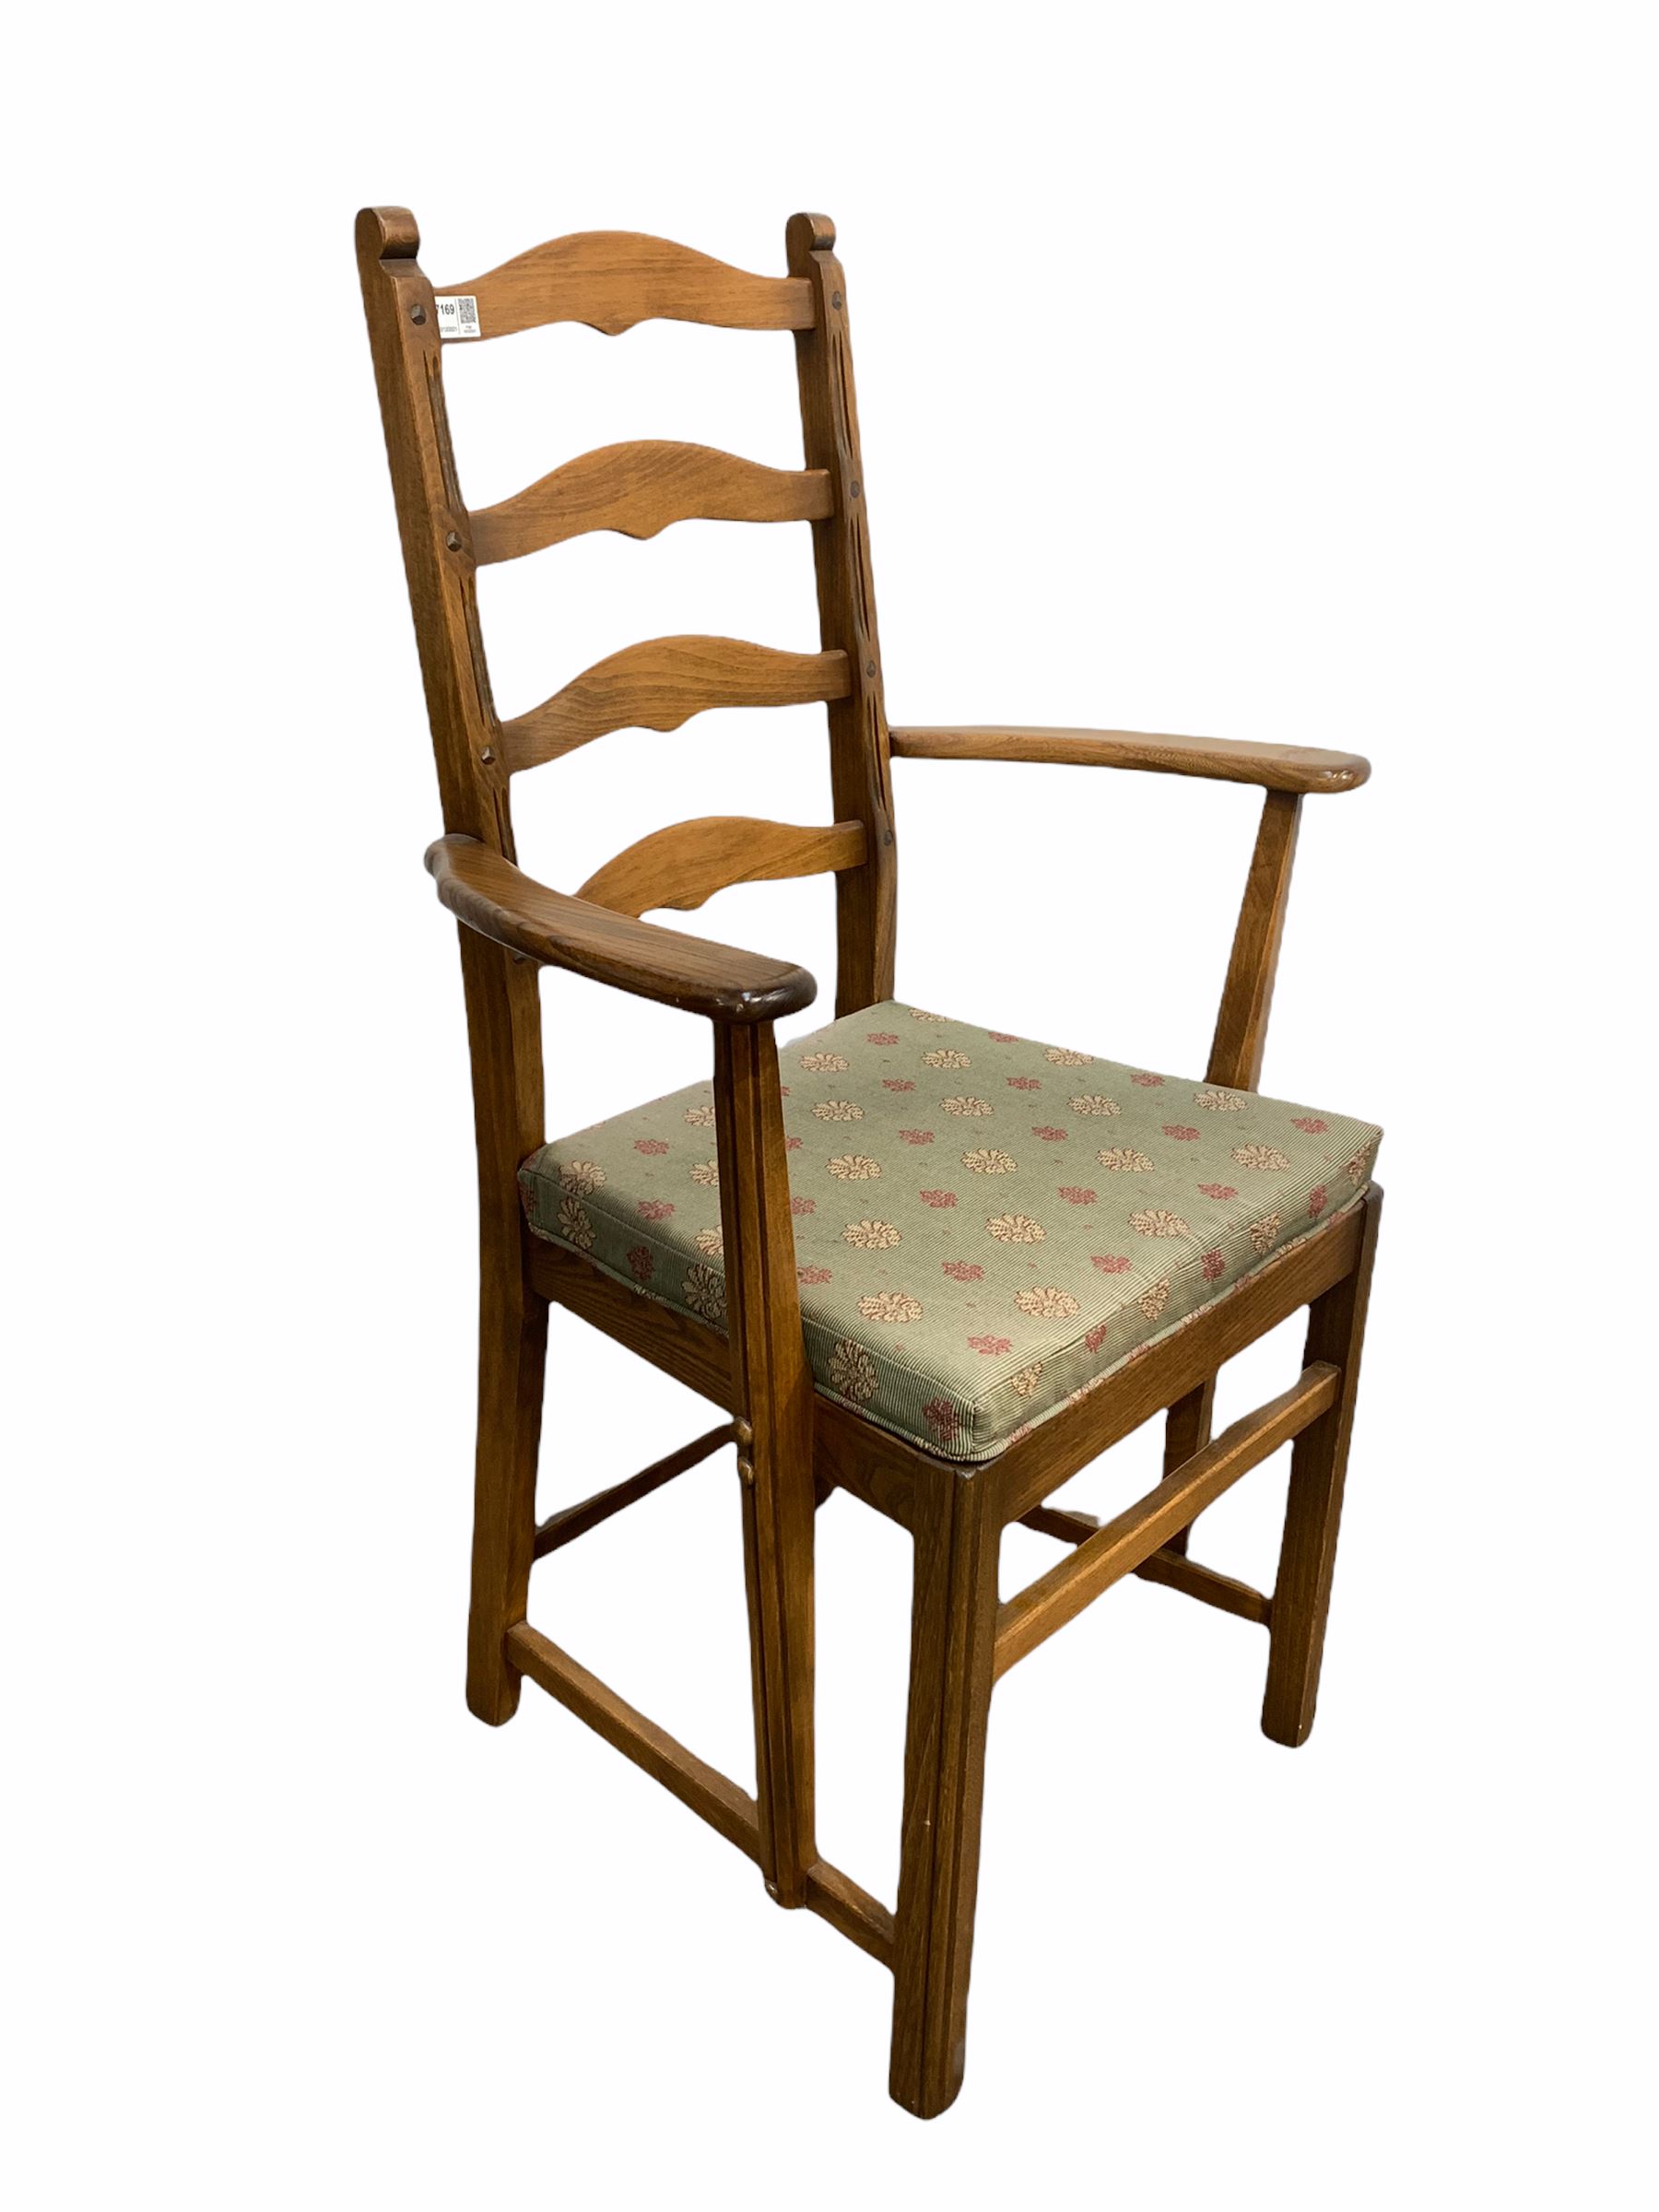 Pair of Ercol ladder back carver chairs with upholstered squab cushions - Image 2 of 3